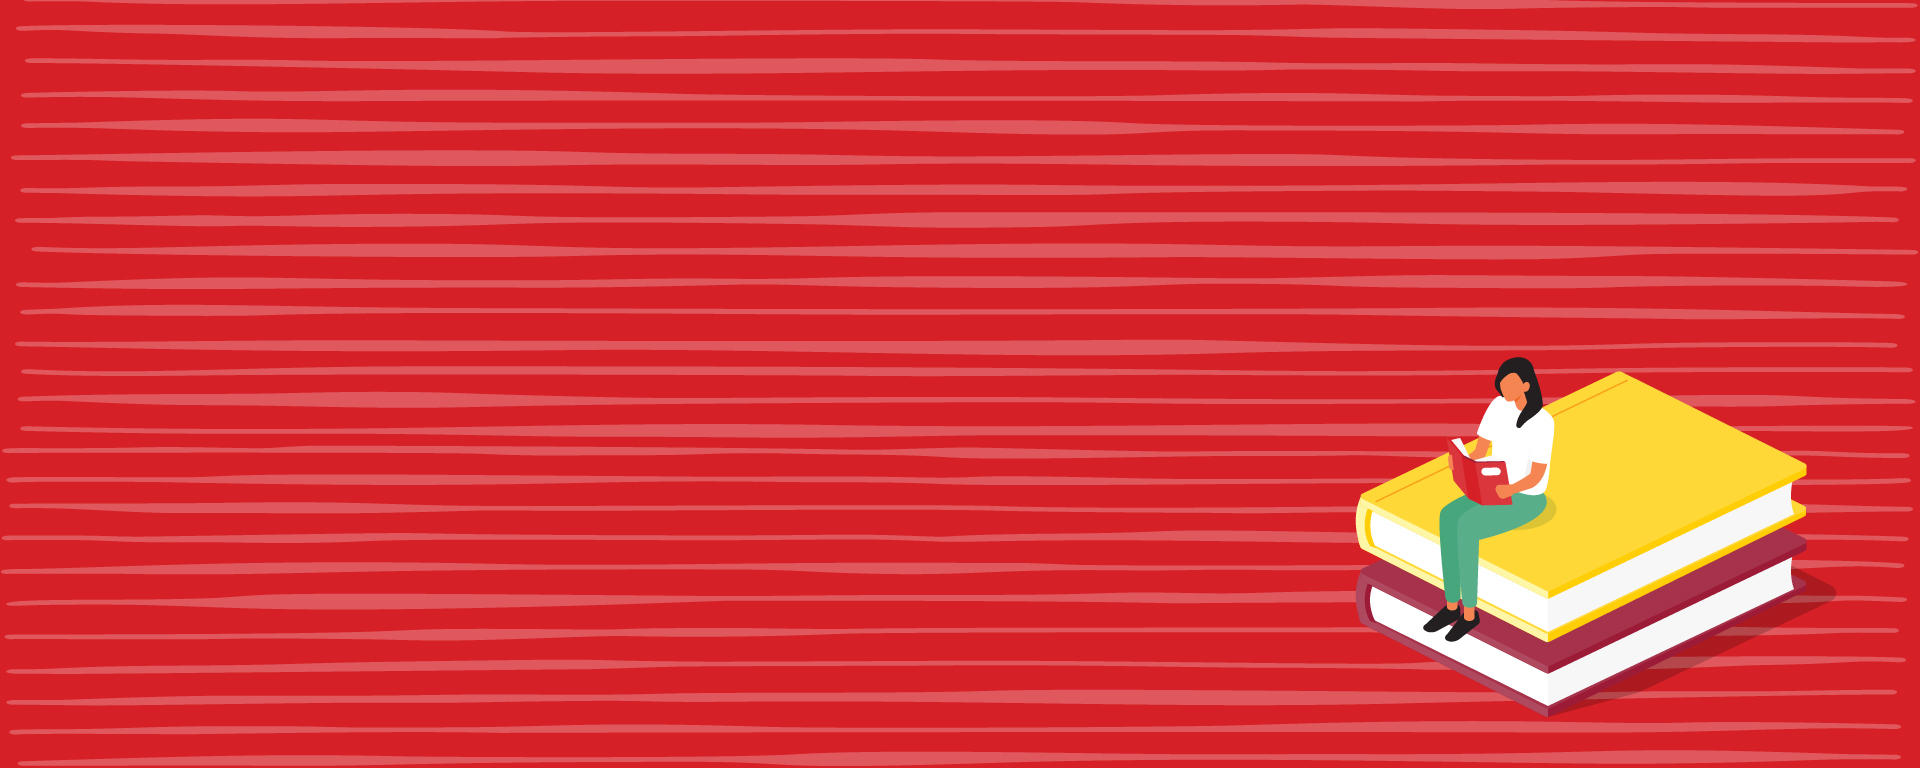 Illustration of a person sitting on a stack of books against a red background with a striped pattern.